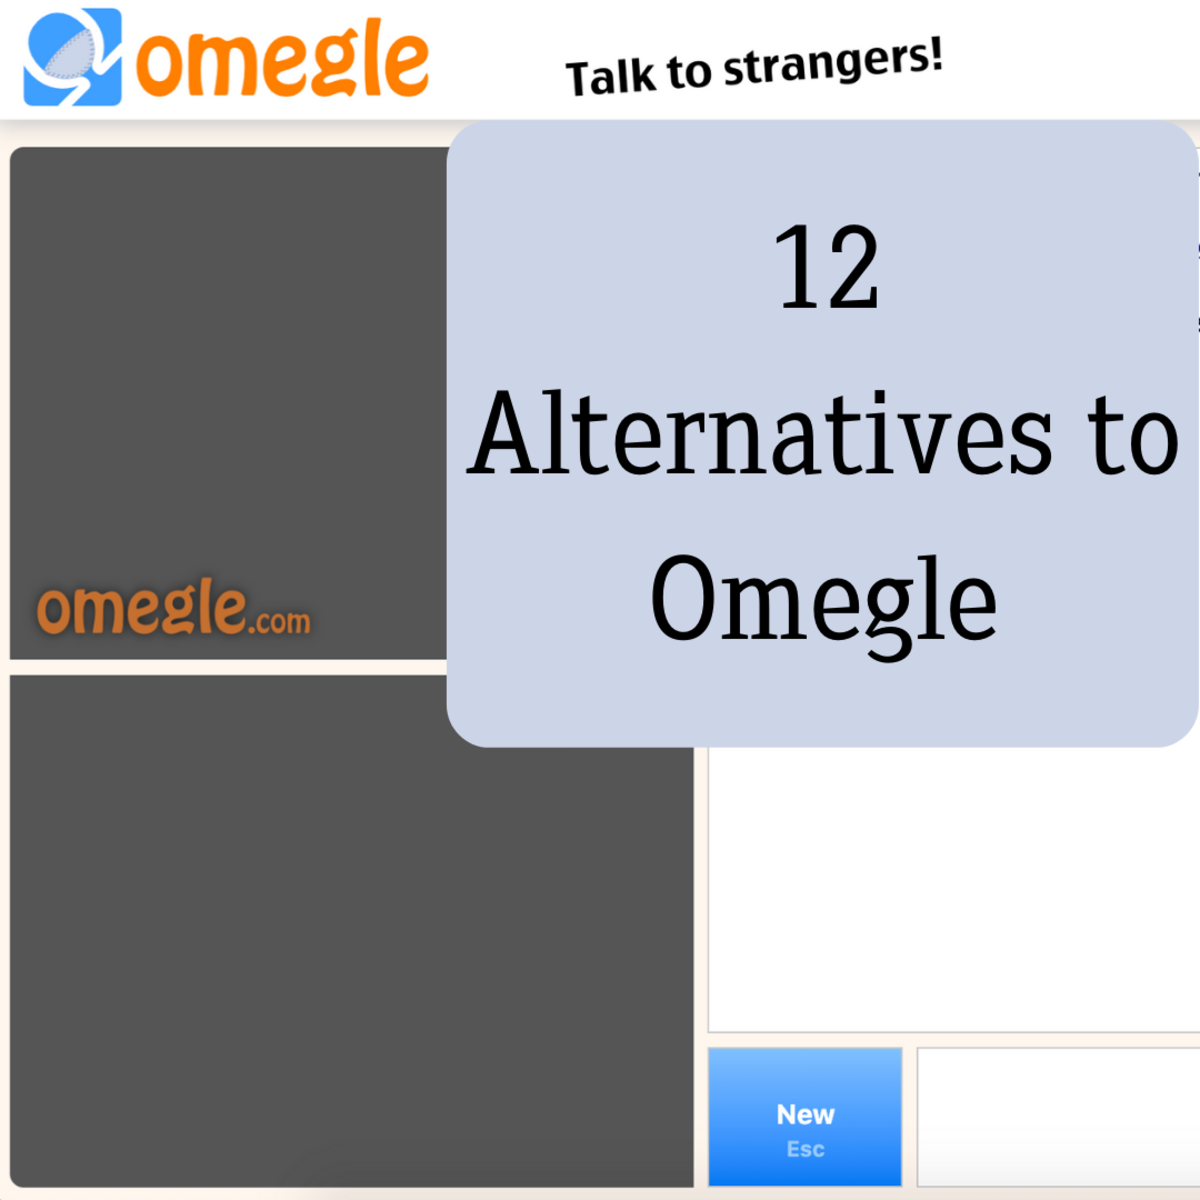 Best of Good hashtags for omegle